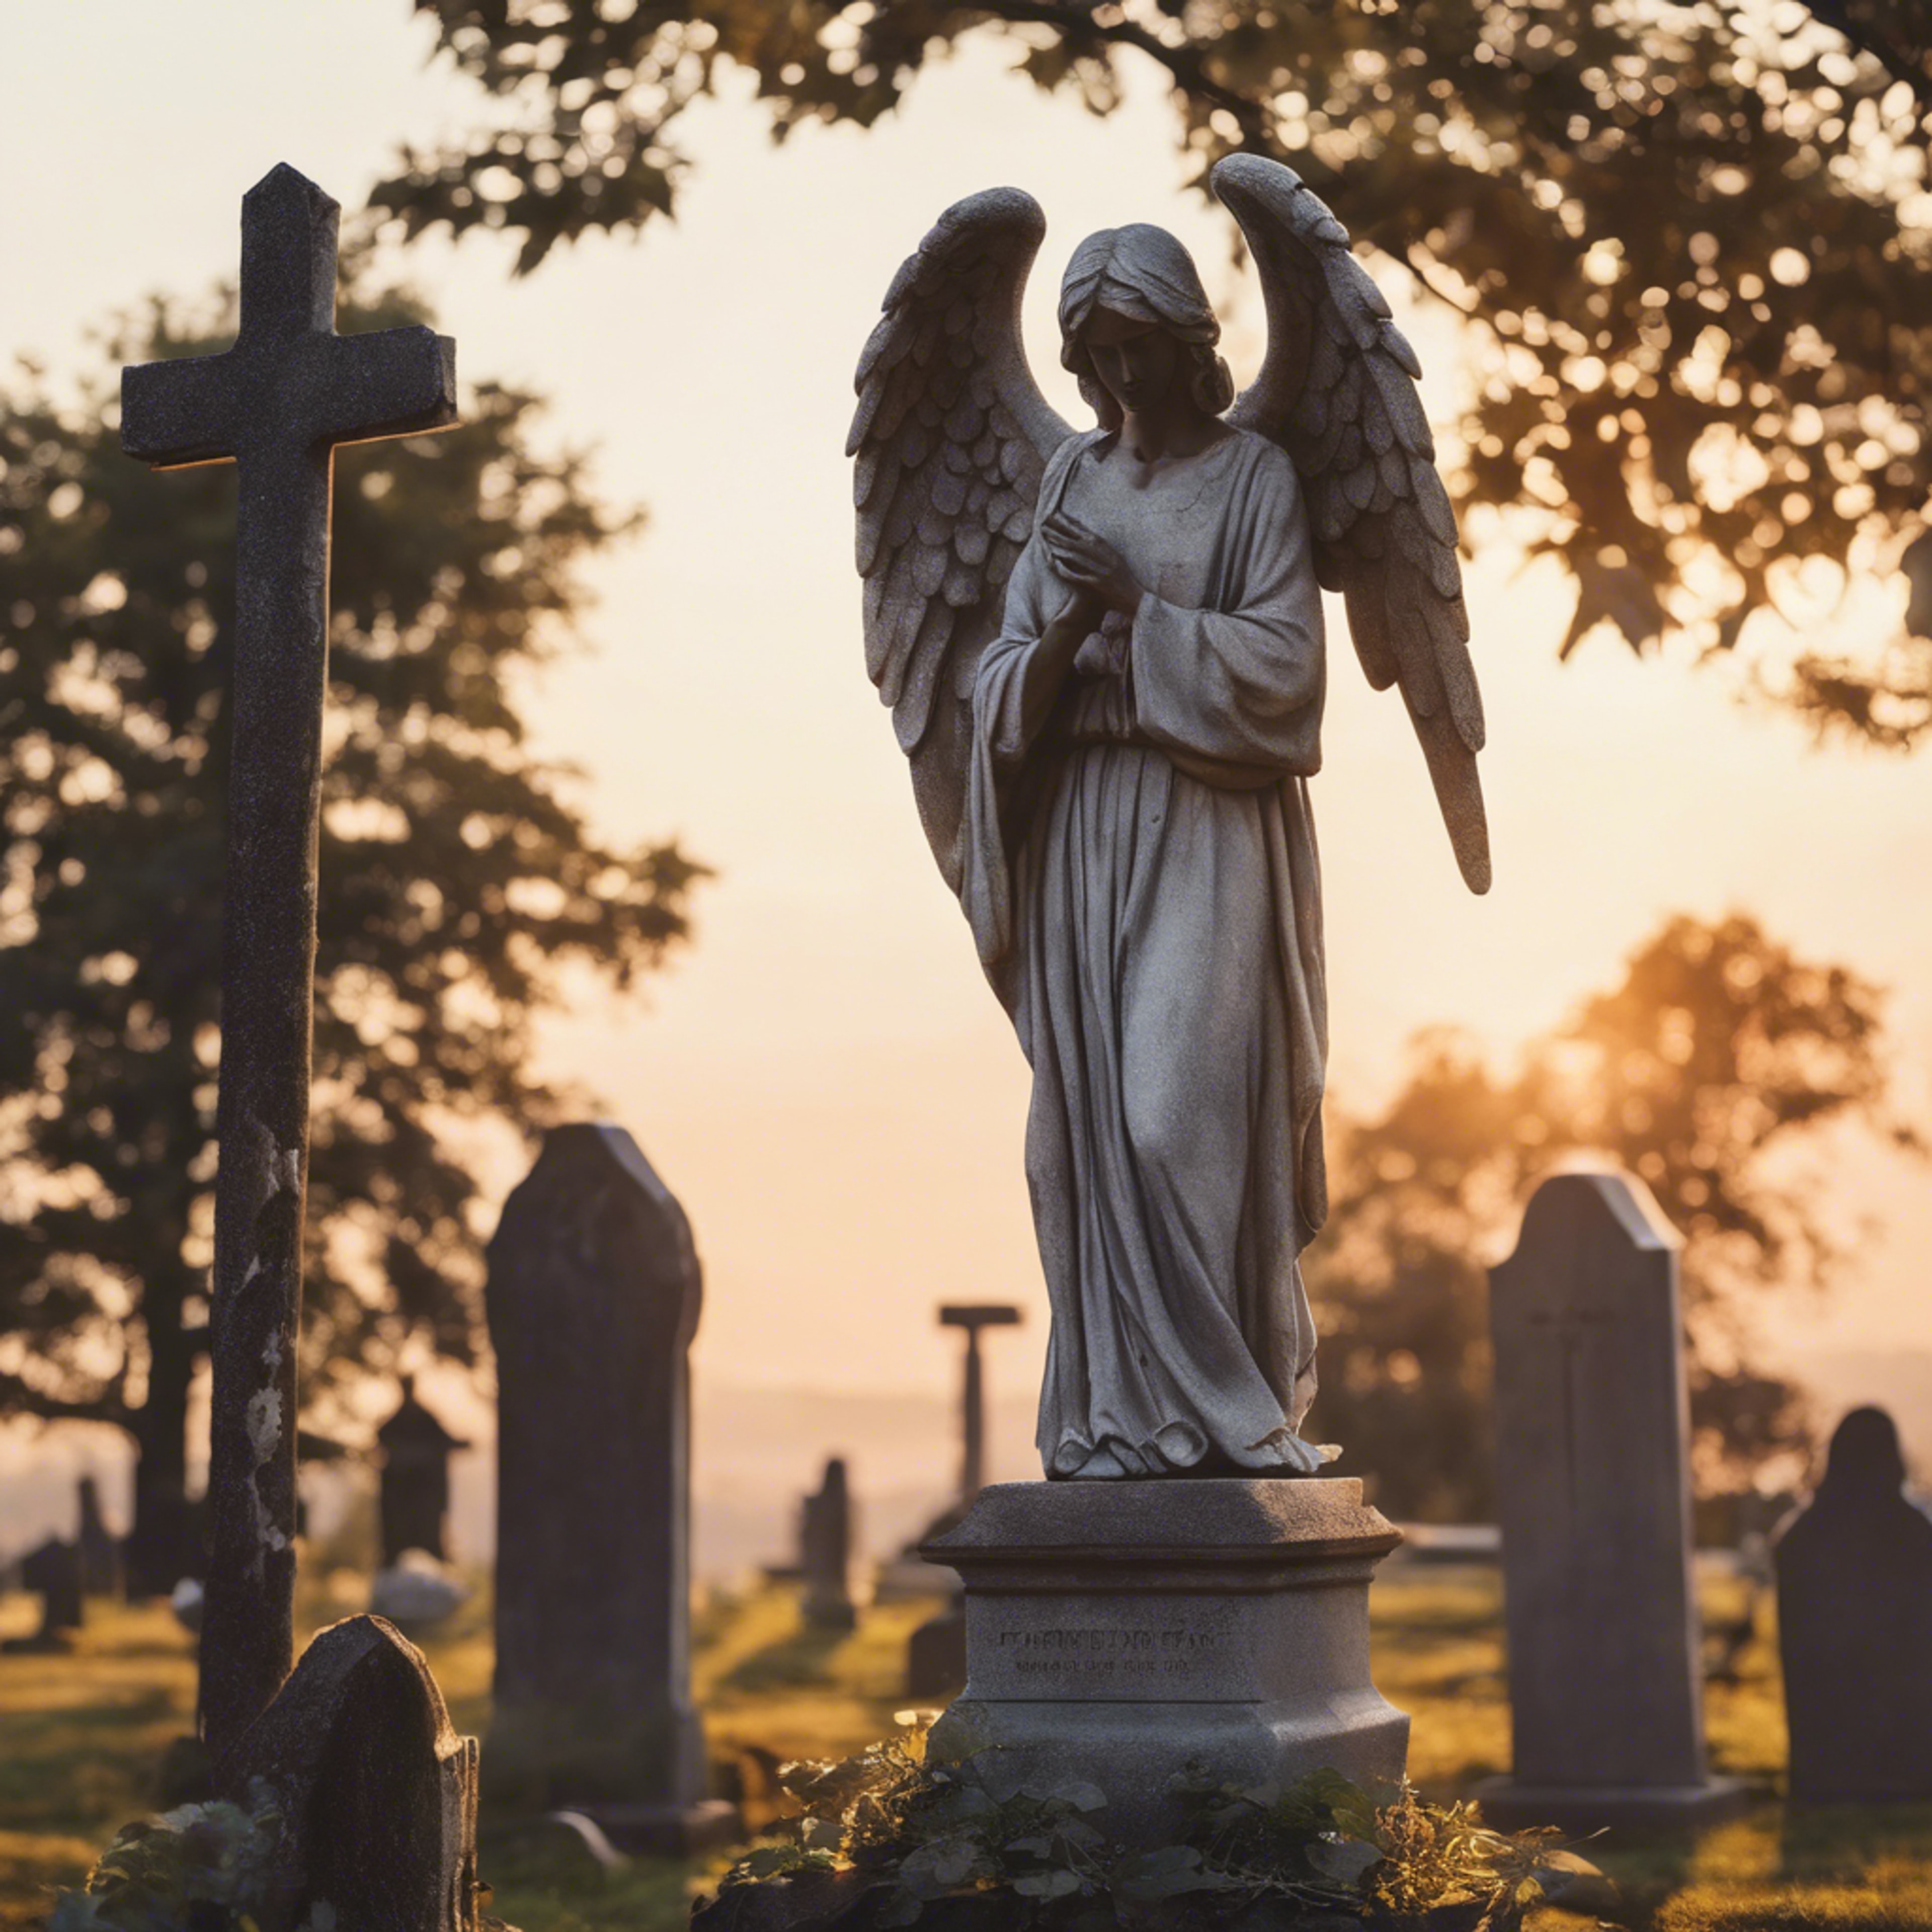 A peaceful graveyard scene with a stone angel statue guarding over the resting place under a serene sunset. Tapeet[5f1d382335d645bc8b2f]